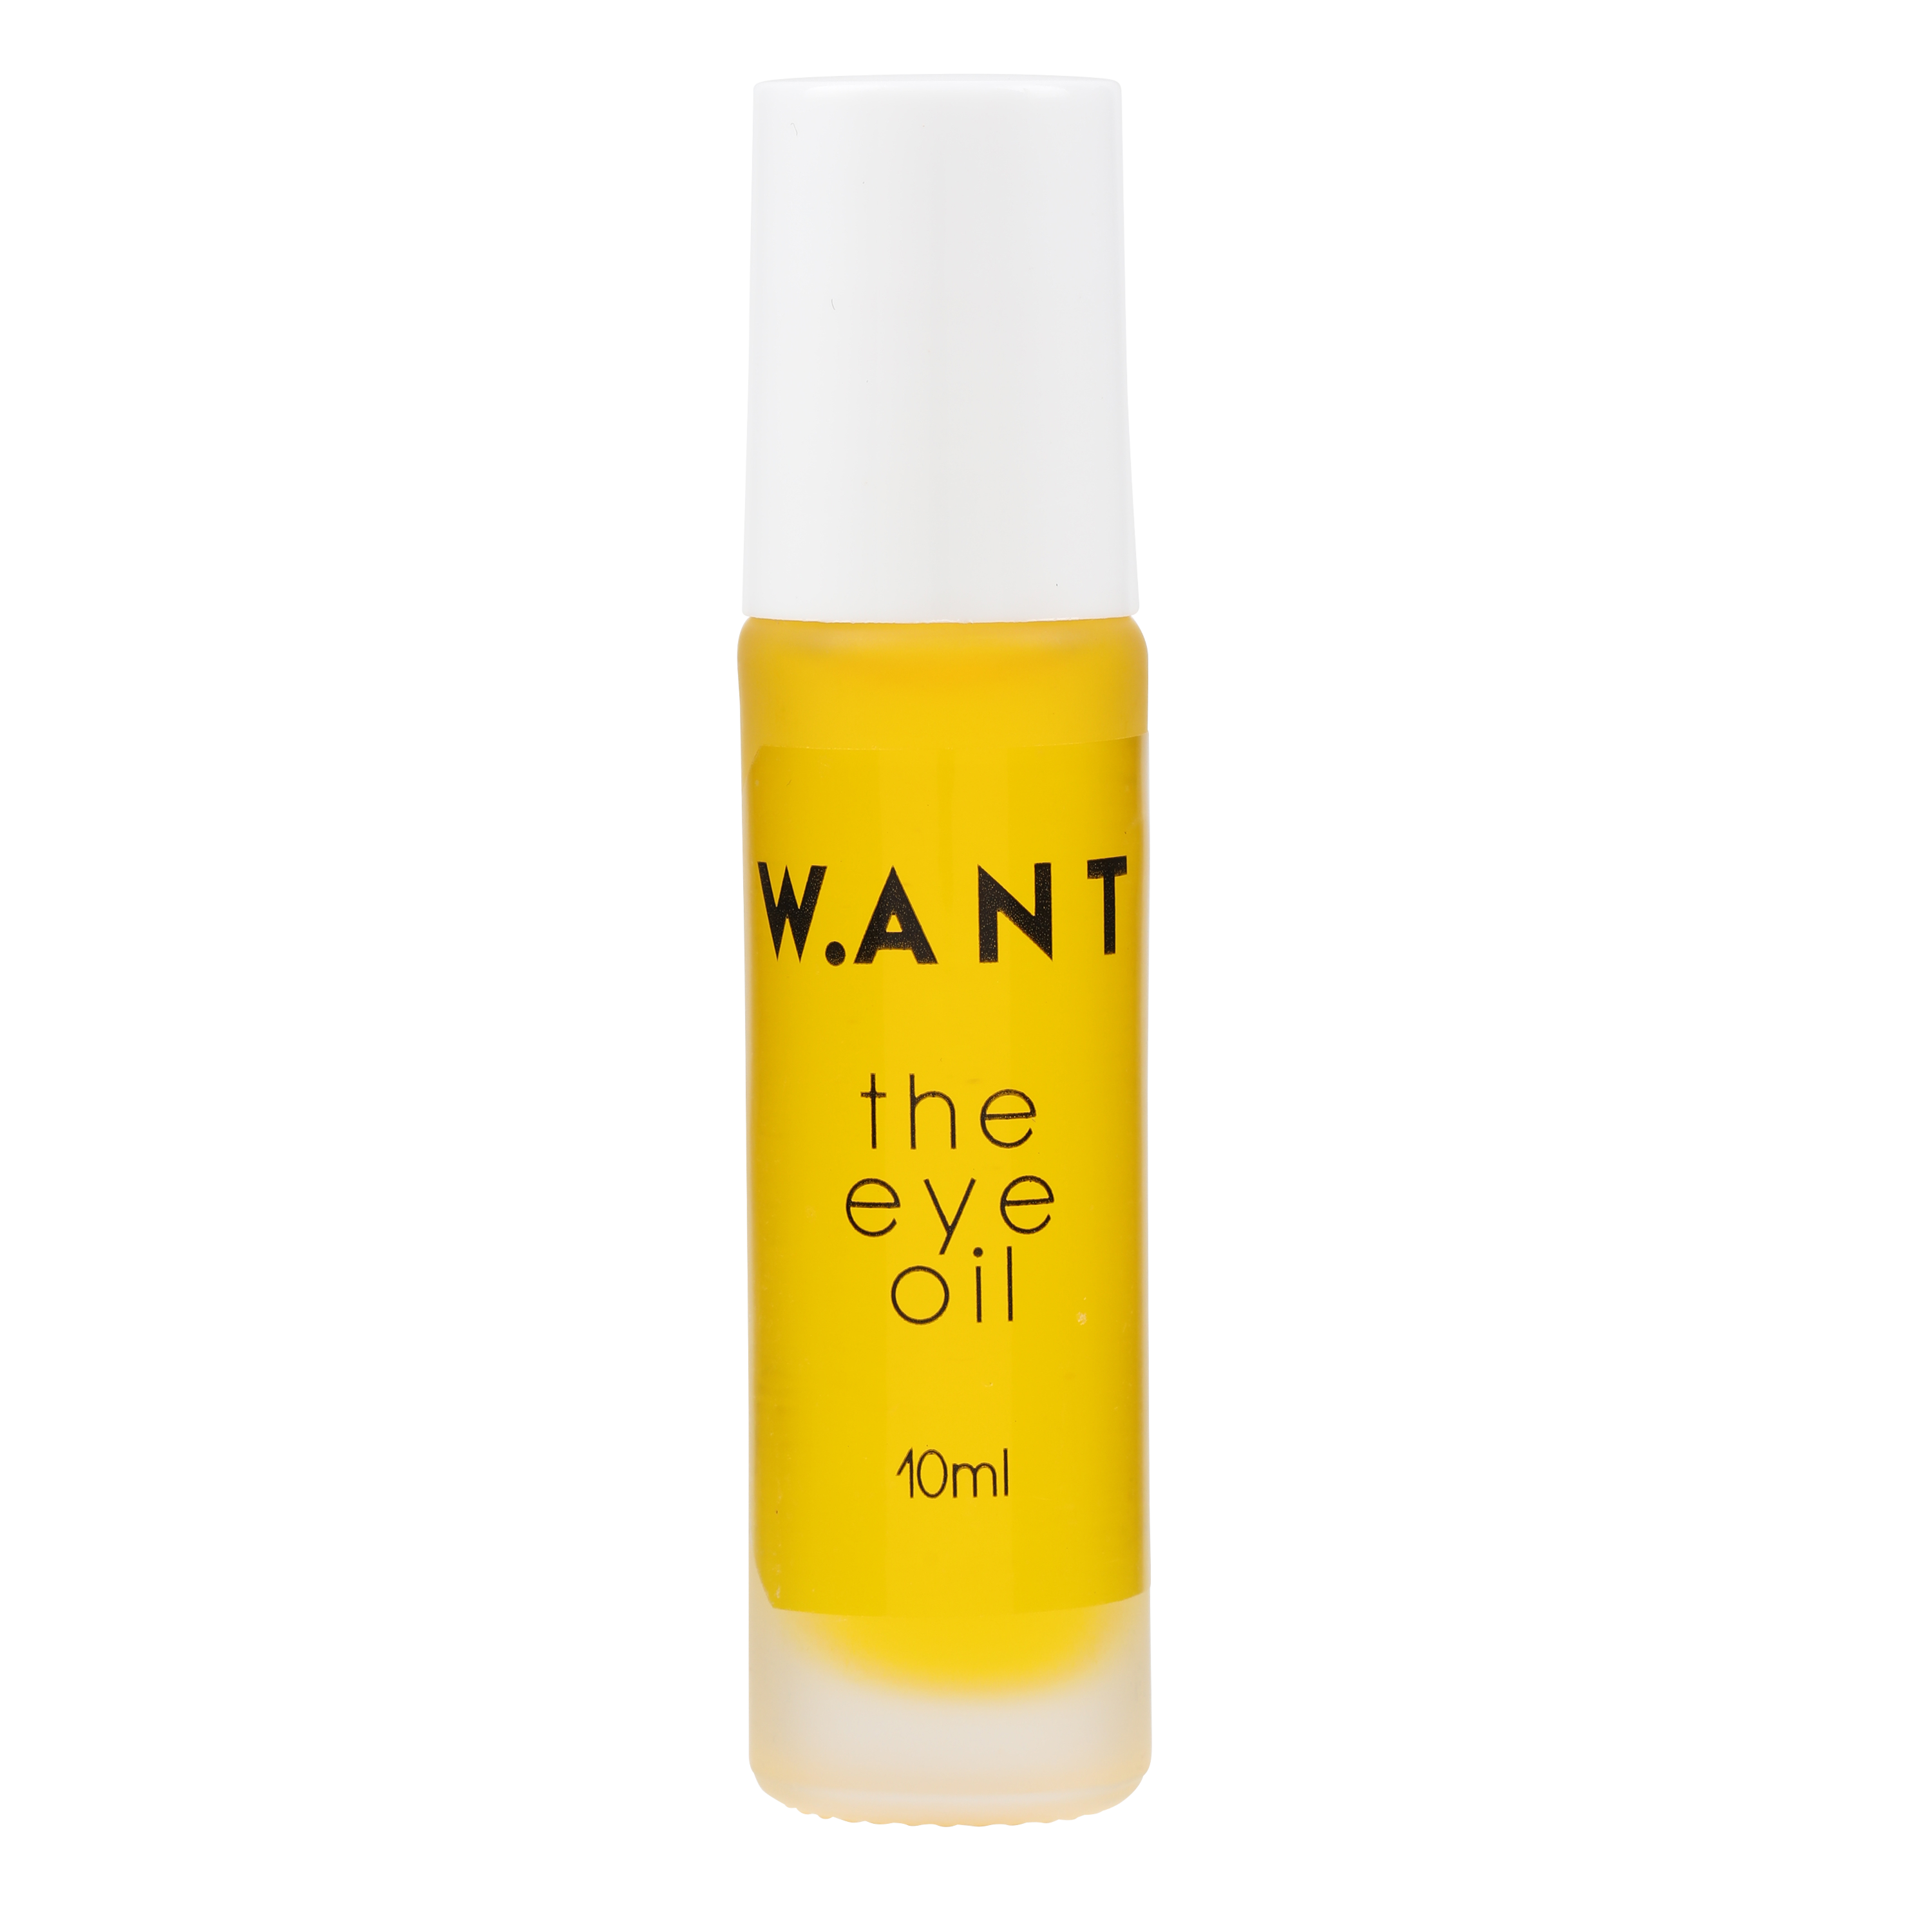 the eye oil - WANT Skincare